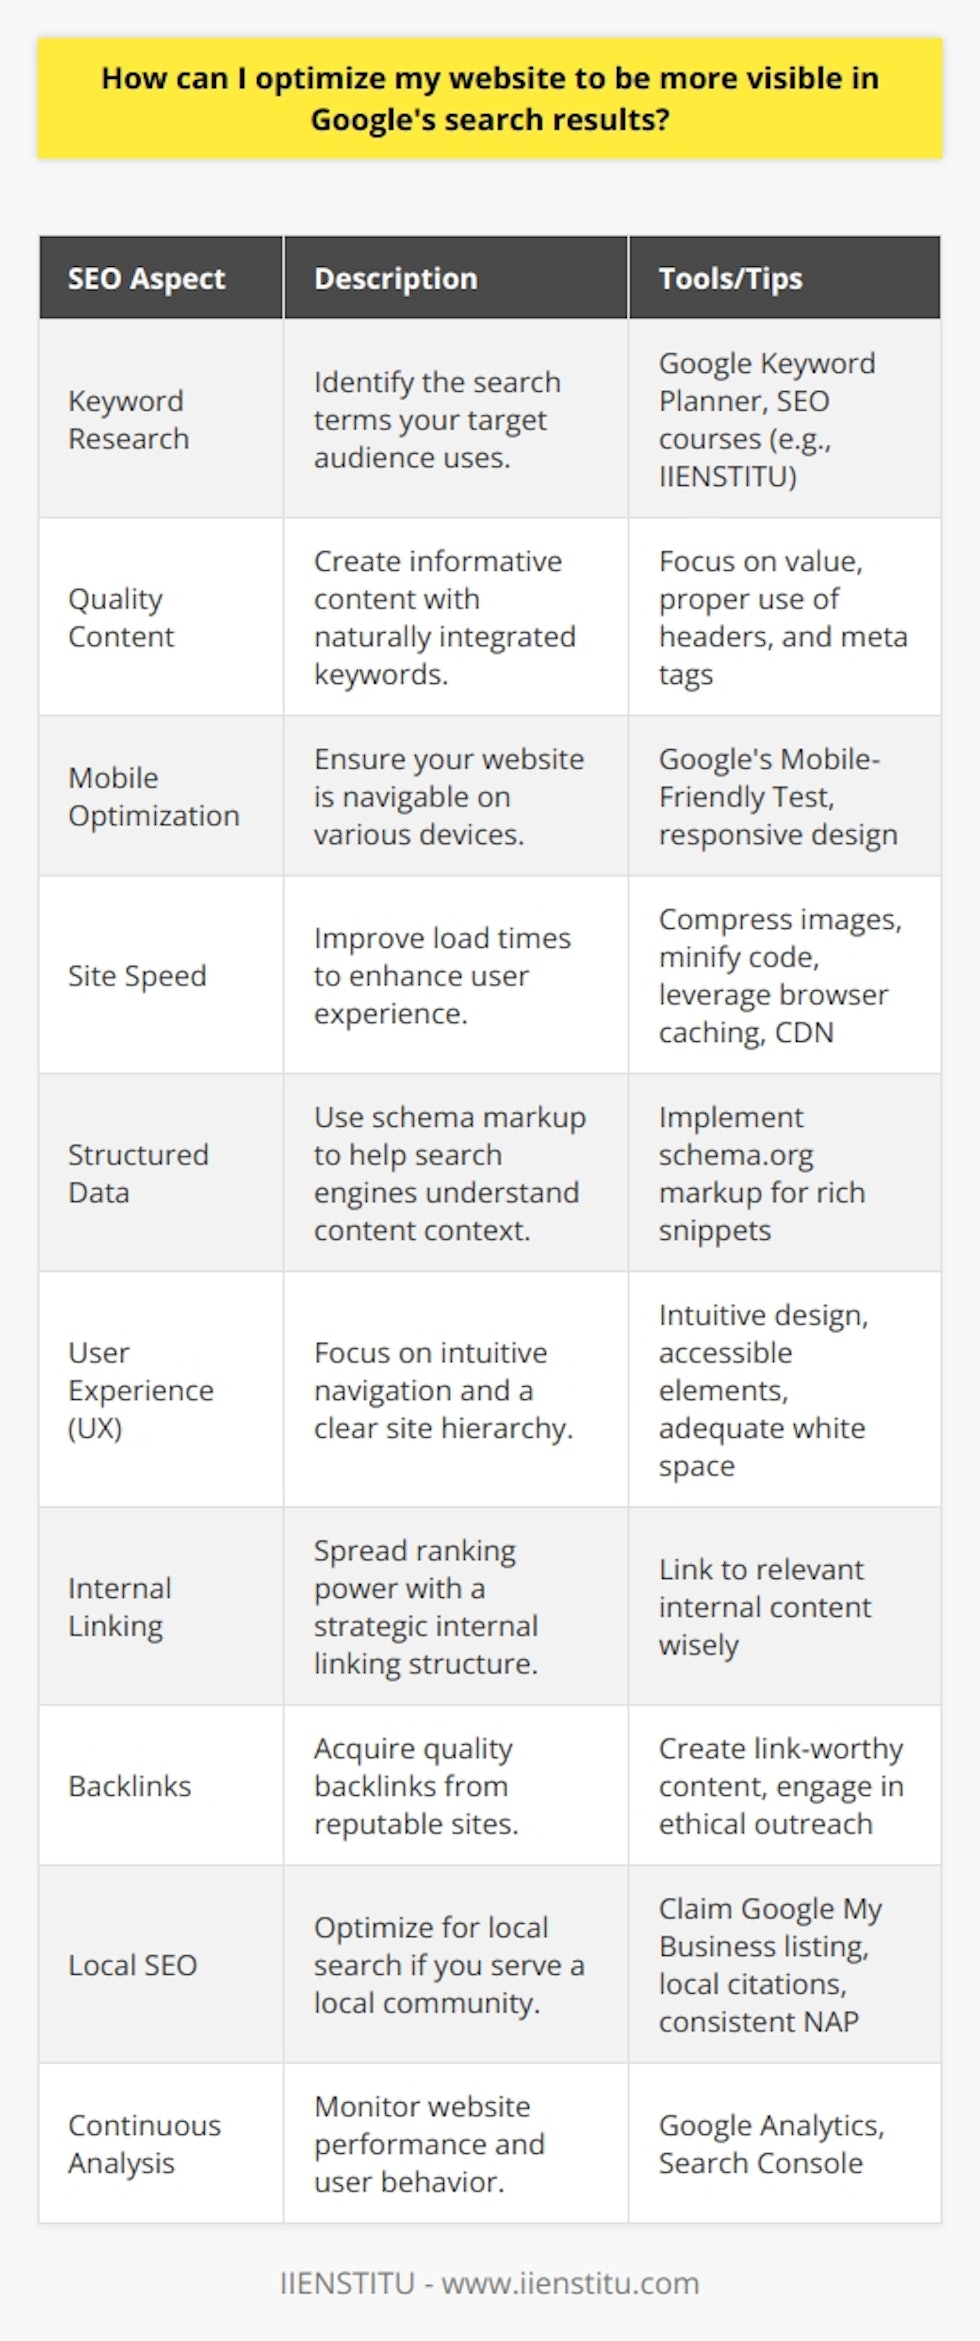 Optimizing a website for better visibility on Google's search results is pivotal for digital visibility and entails a combination of on-page and off-page SEO techniques. Let's delve into various aspects that can improve your website's SEO performance.1. Keyword Research: Begin with comprehensive keyword research. Identify the search terms your potential audience uses. Tools like Google Keyword Planner can help, but consider platforms like IIENSTITU for in-depth courses on harnessing SEO and keywords effectively.2. Quality Content: Content is the cornerstone of solid SEO. Craft high-quality, informative content that adds value to your audience. Use your keywords naturally within the text, headers, and meta tags to make your content relevant and engaging. Remember, content that resonates with readers can lead to increased dwell time, which in turn signals Google that your site is providing valuable information.3. Mobile Optimization: With mobile searches continually on the rise, Google emphasizes mobile-friendly websites. Ensure your website is responsive, meaning it adapts and is navigable on various devices, smartphones included. Use Google's Mobile-Friendly Test tool to check your site’s performance on mobile devices.4. Site Speed: Site speed is a direct ranking factor. Fast-loading pages enhance user experience and reduce bounce rates. Compress images, minify code, leverage browser caching, and consider a content delivery network (CDN) to improve load times.5. Structured Data: Implement structured data to help Google understand the context of your content. This includes using schema markup to provide explicit clues about the meaning of a page, which could enhance its appearance in search results with rich snippets.6. User Experience (UX): Google's algorithm updates now focus on user experience signals. Your site's navigation should be intuitive, with a clear hierarchy. Ensure clickable elements are easily identifiable and accessible, and provide ample white space to prevent a cluttered layout.7. Internal Linking: A strategic internal linking structure can help spread ranking power throughout your site. Link to relevant, high-quality content within your website to keep users engaged and enable search engines to crawl your site more effectively.8. Backlinks: Quality backlinks from reputable sites remain a significant ranking factor. Earn backlinks by creating link-worthy content and engaging in ethical outreach. Remember, it's about the quality of links, not just quantity.9. Local SEO: If your business serves a local community, ensure your local SEO is on point. This includes claiming your Google My Business listing, acquiring local citations, and ensuring NAP (Name, Address, Phone Number) consistency across the web.10. Continuous Analysis: Use tools like Google Analytics and Search Console to track your website's performance. Monitor metrics such as traffic, bounce rate, and conversion rates to understand user behavior and refine your SEO strategies accordingly.By focusing on these areas, you can create a well-optimized website that not only ranks higher in Google search results but also provides a superior user experience. SEO is an ongoing process that requires constant attention and adaptation to the ever-evolving search engine algorithms. Always adhere to Google's Webmaster Guidelines to avoid penalties and maintain your site's credibility in the digital realm.